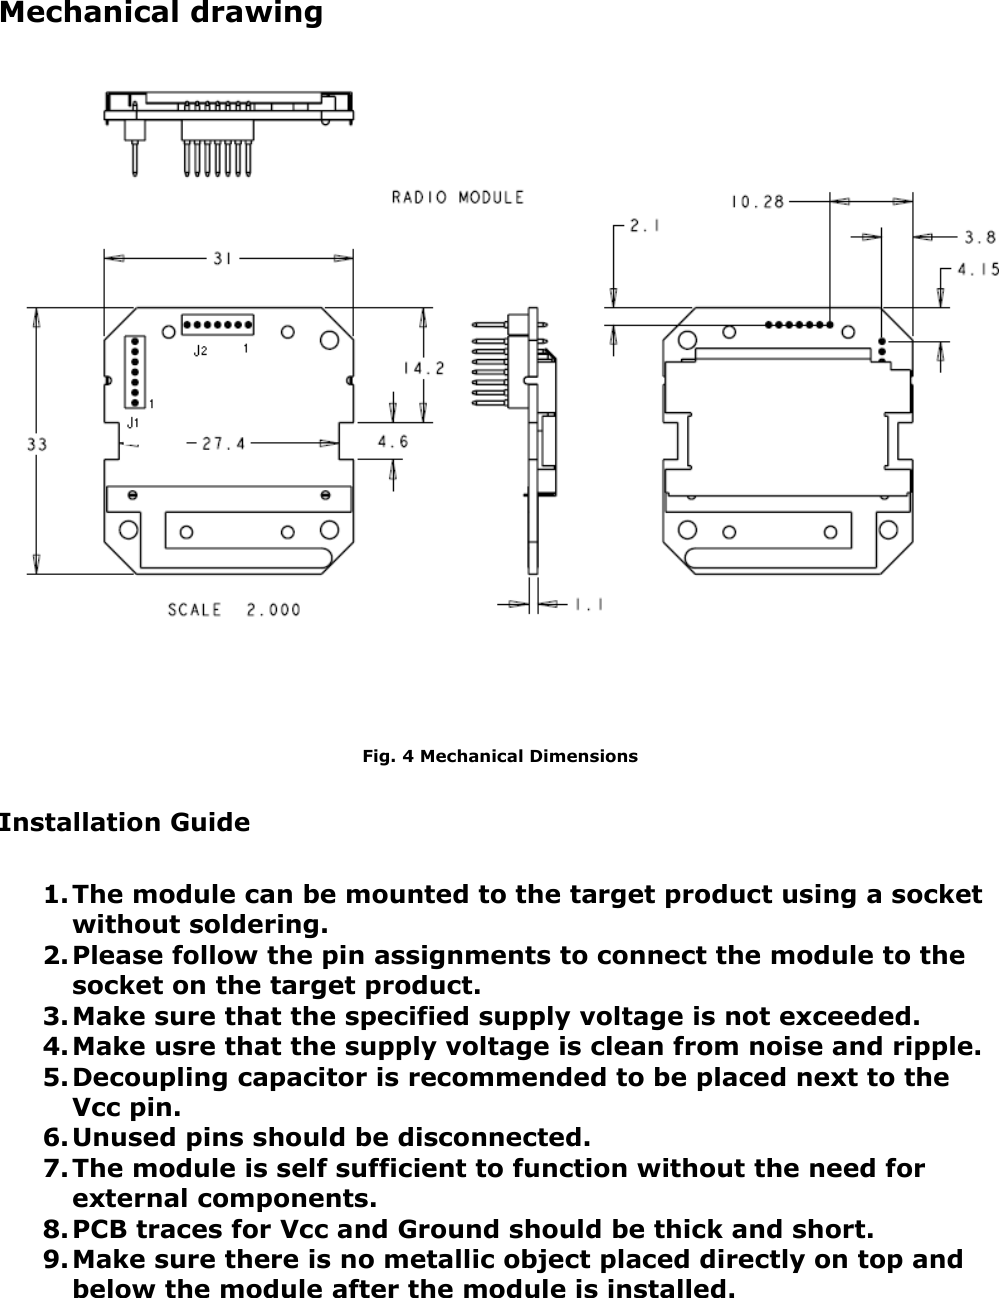 Mechanical drawingFig. 4 Mechanical DimensionsInstallation Guide1.The module can be mounted to the target product using a socket without soldering.2.Please follow the pin assignments to connect the module to the socket on the target product.3.Make sure that the specified supply voltage is not exceeded.4.Make usre that the supply voltage is clean from noise and ripple.5.Decoupling capacitor is recommended to be placed next to the Vcc pin.6.Unused pins should be disconnected.7.The module is self sufficient to function without the need for external components.8.PCB traces for Vcc and Ground should be thick and short.9.Make sure there is no metallic object placed directly on top and below the module after the module is installed.